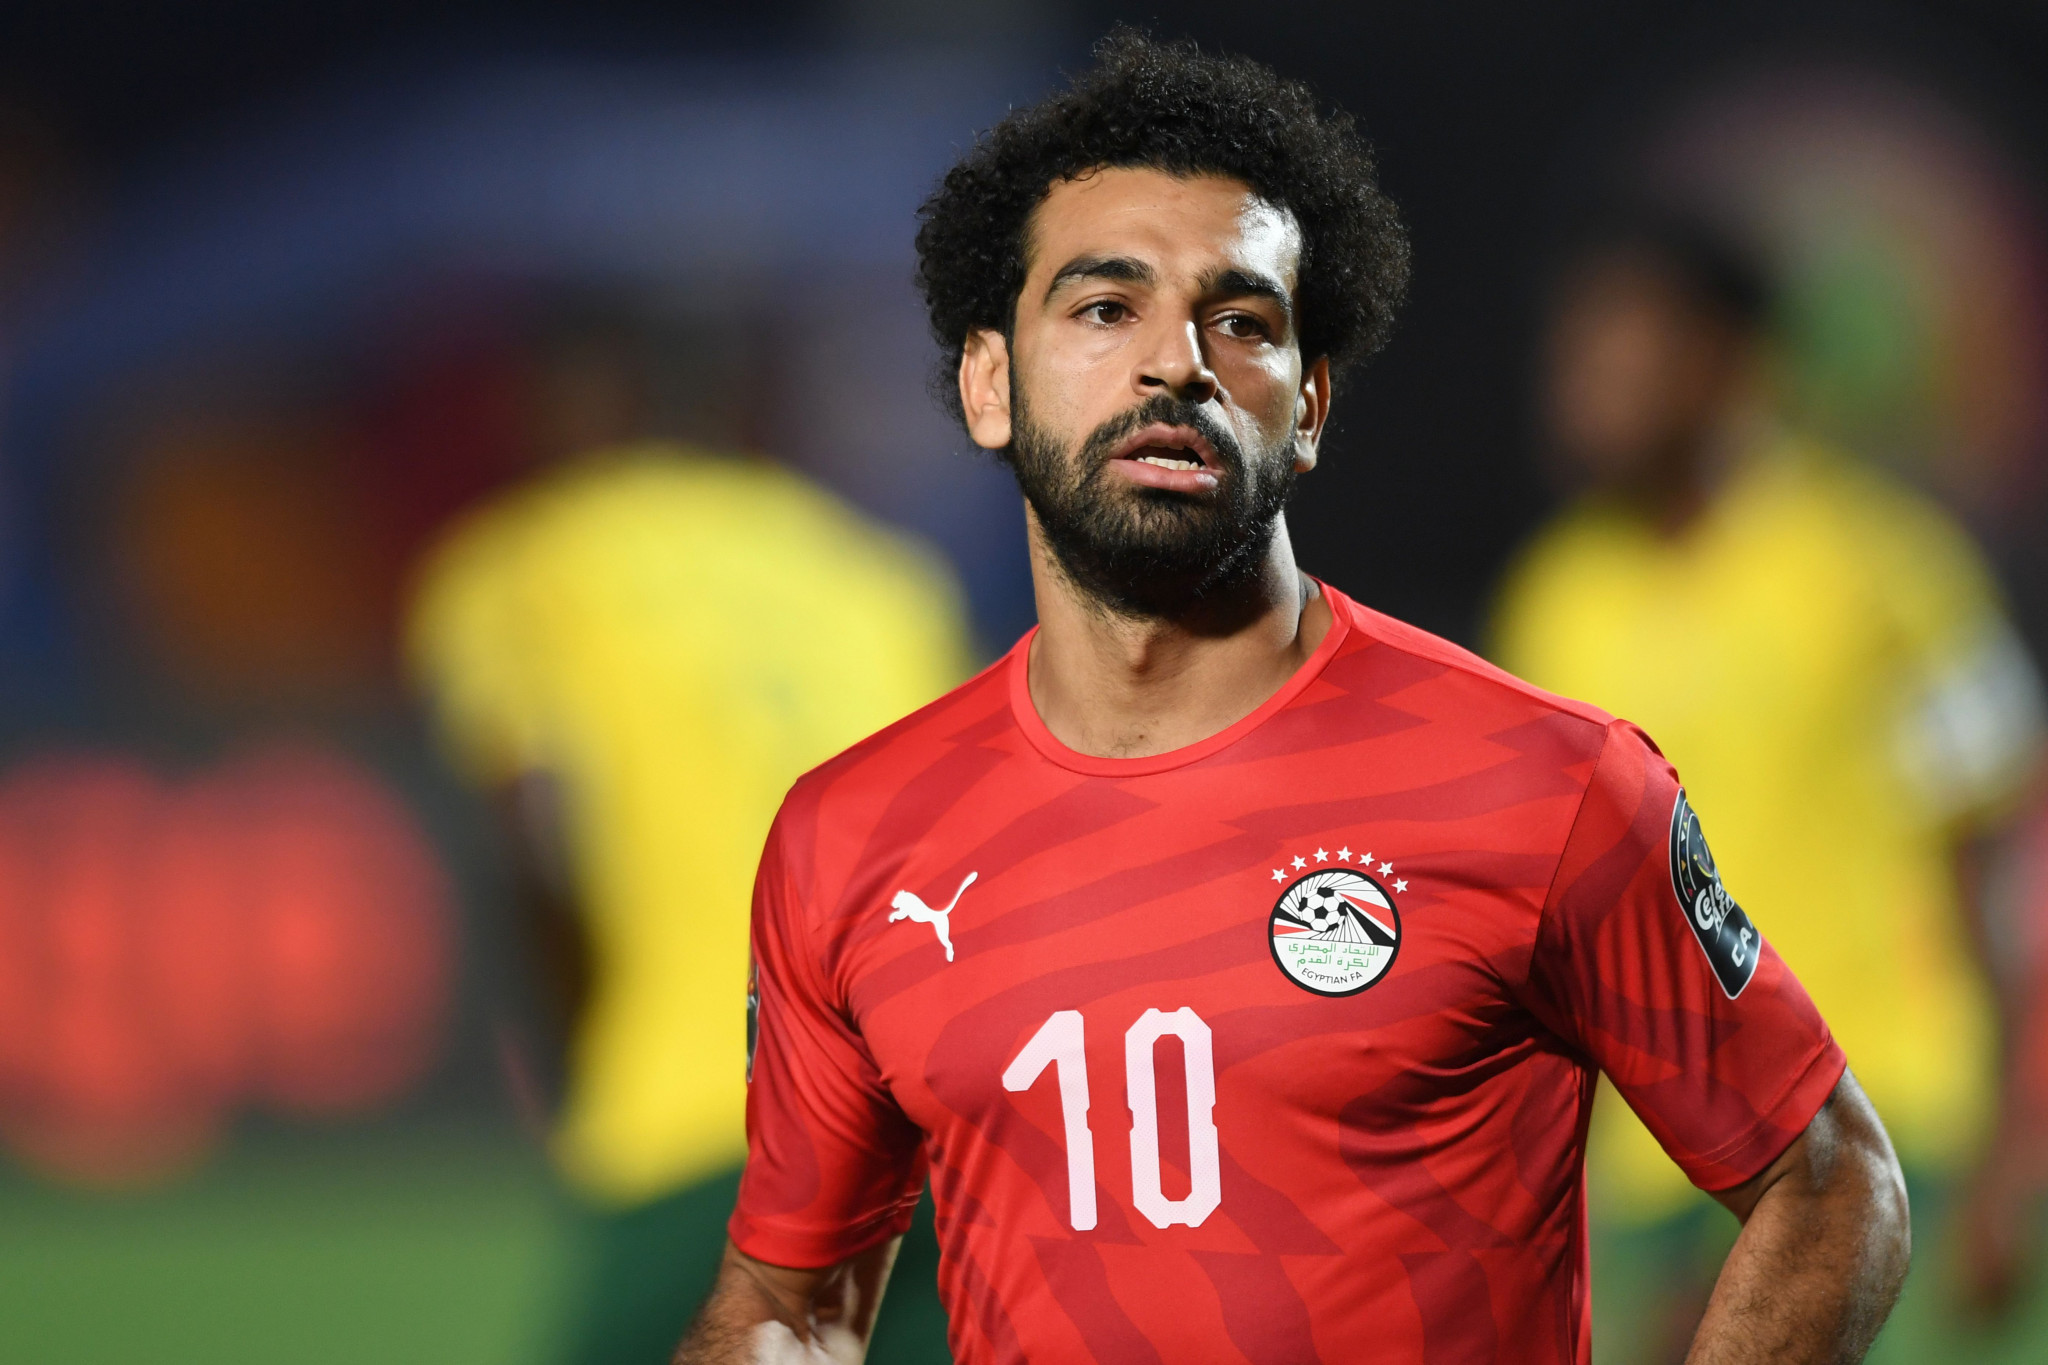 Mohamed Salah could compete for Egypt at Tokyo 2020 ©Getty Images